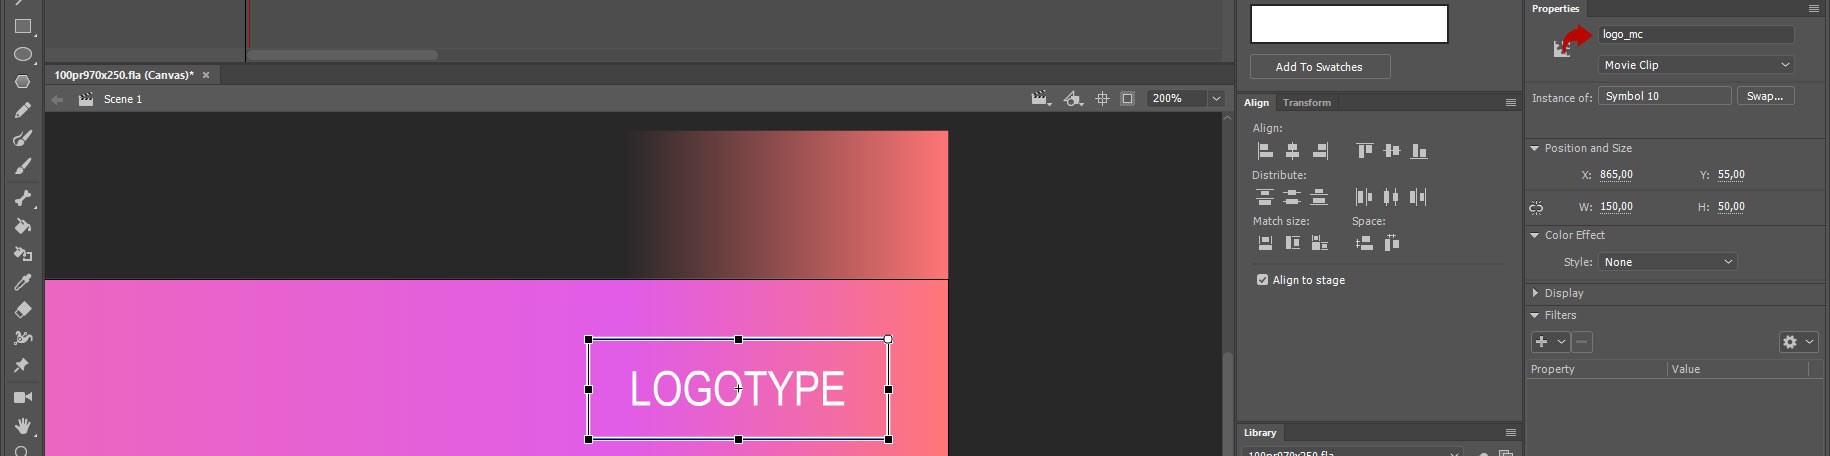 Screenshot from Adobe Animate. Setting the movie clip name in the Label of the Properties panel